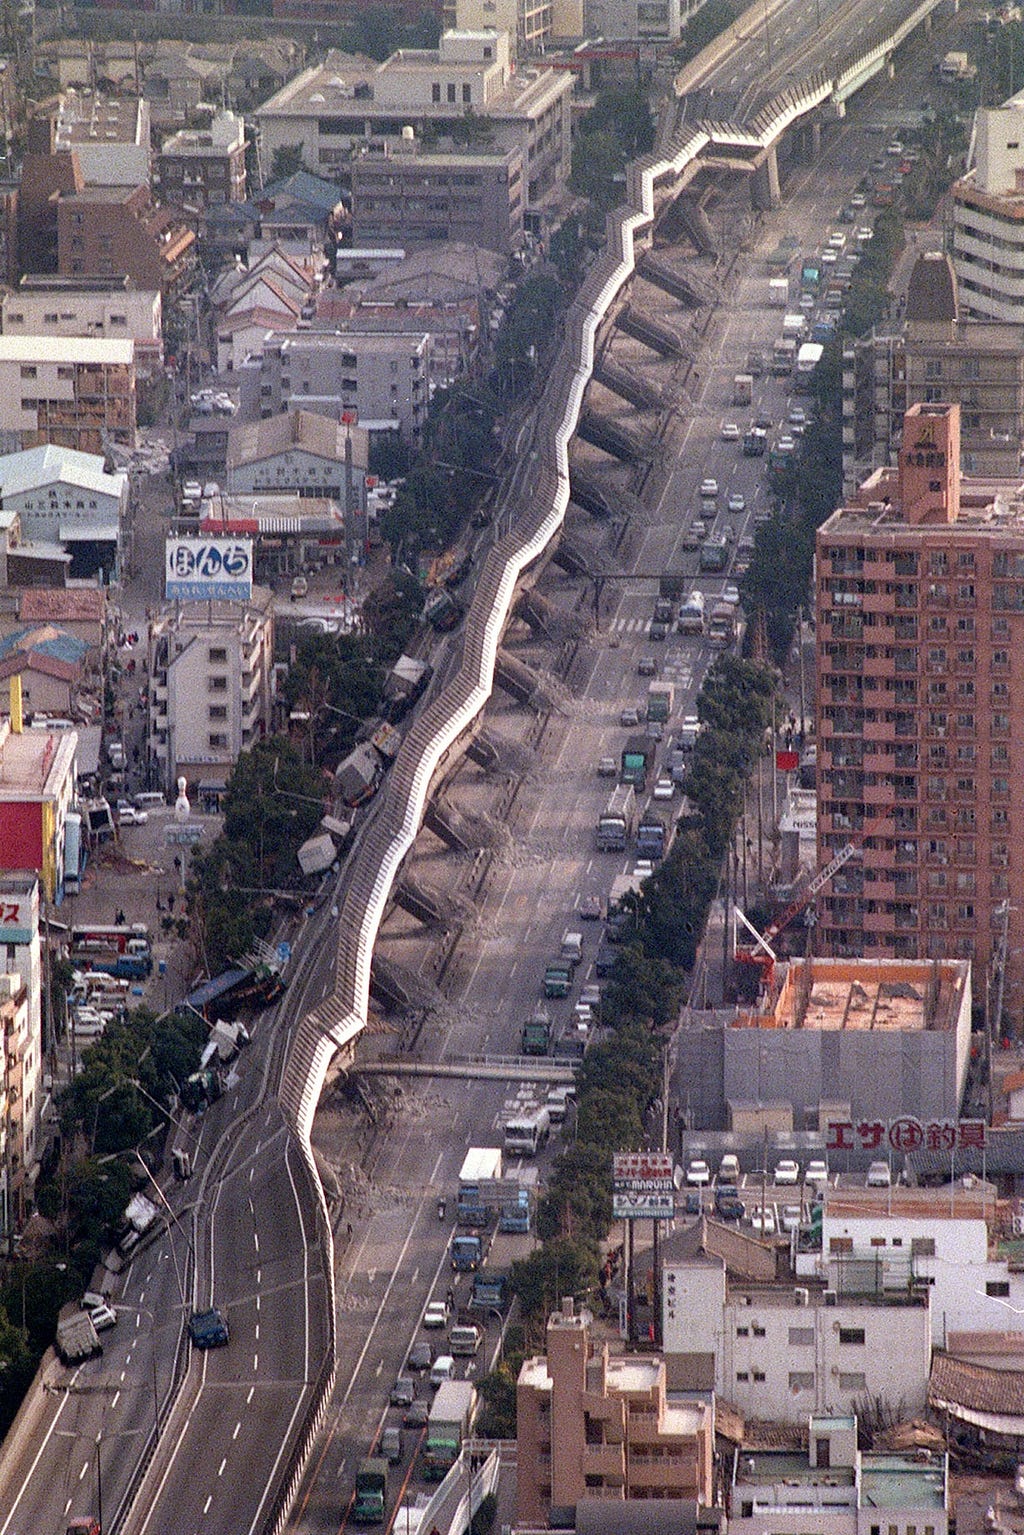 Collapsed elevated highway in Kobe Japan from 1995 earthquake